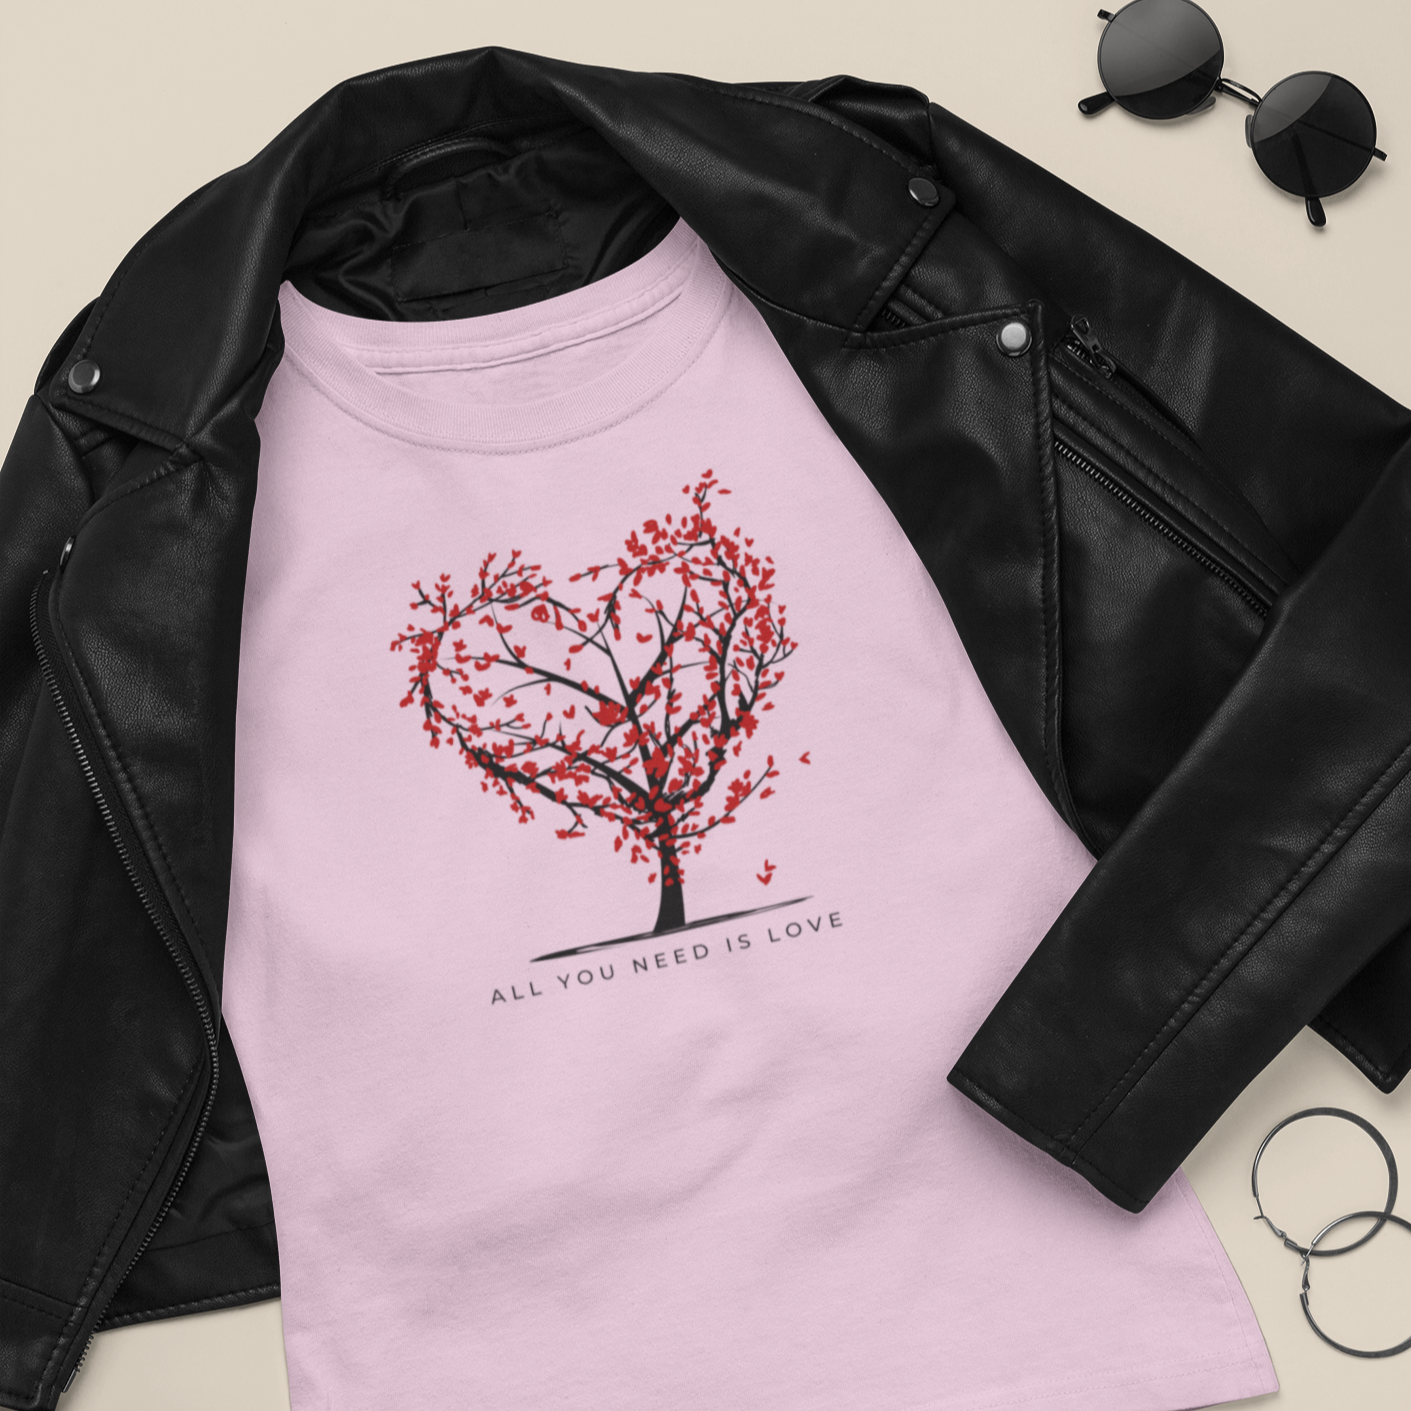 Story of Awakening Lifestyle Community Spirituality Relationships Love Light Meditation Oneness Earth Balance Healing Shop Store Charity Tree Nature Read Write T shirt Tops Tees Clothing Women Horoscope All you need is love quote Valentines Day